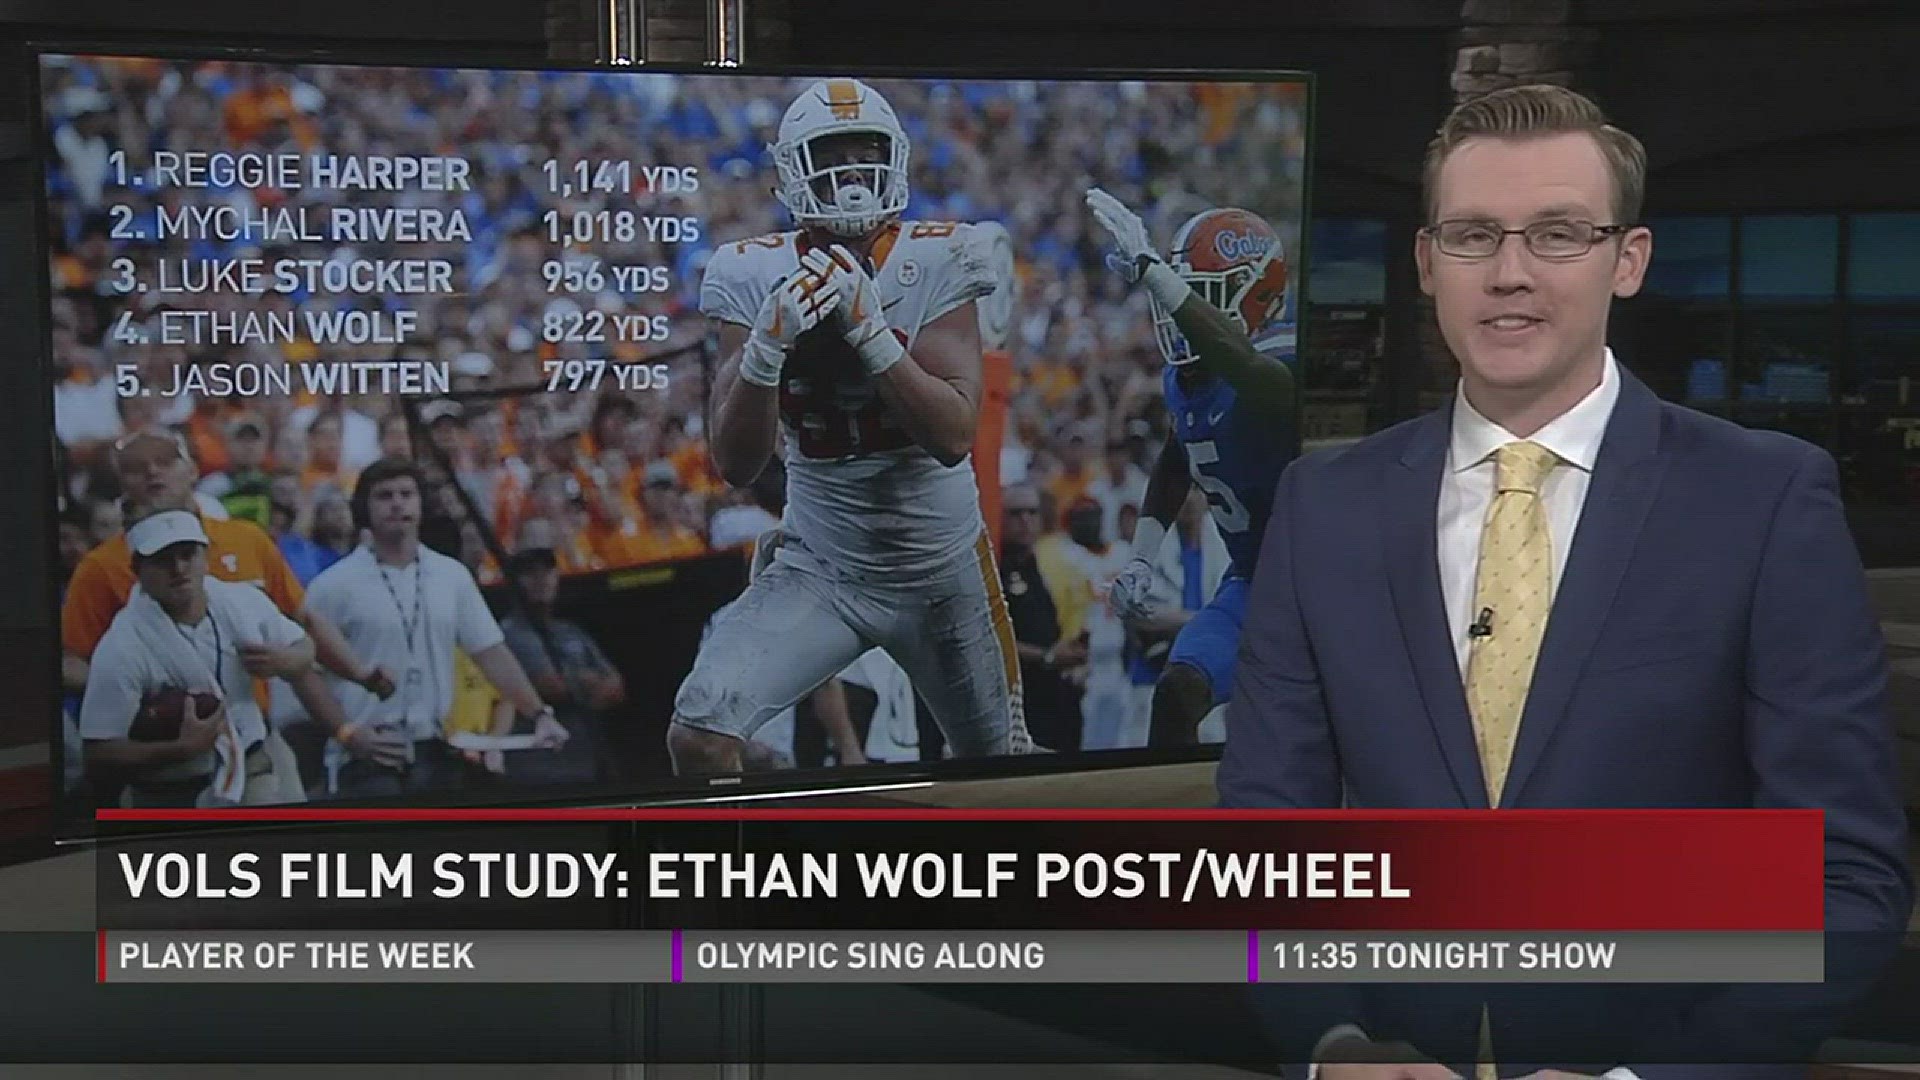 WBIR 10Sports Anchor Patrick Murray breaks down Ethan Wolf's touchdown that pushed him past Jason Witten on the Vols all-time tight ends receiving yards list.